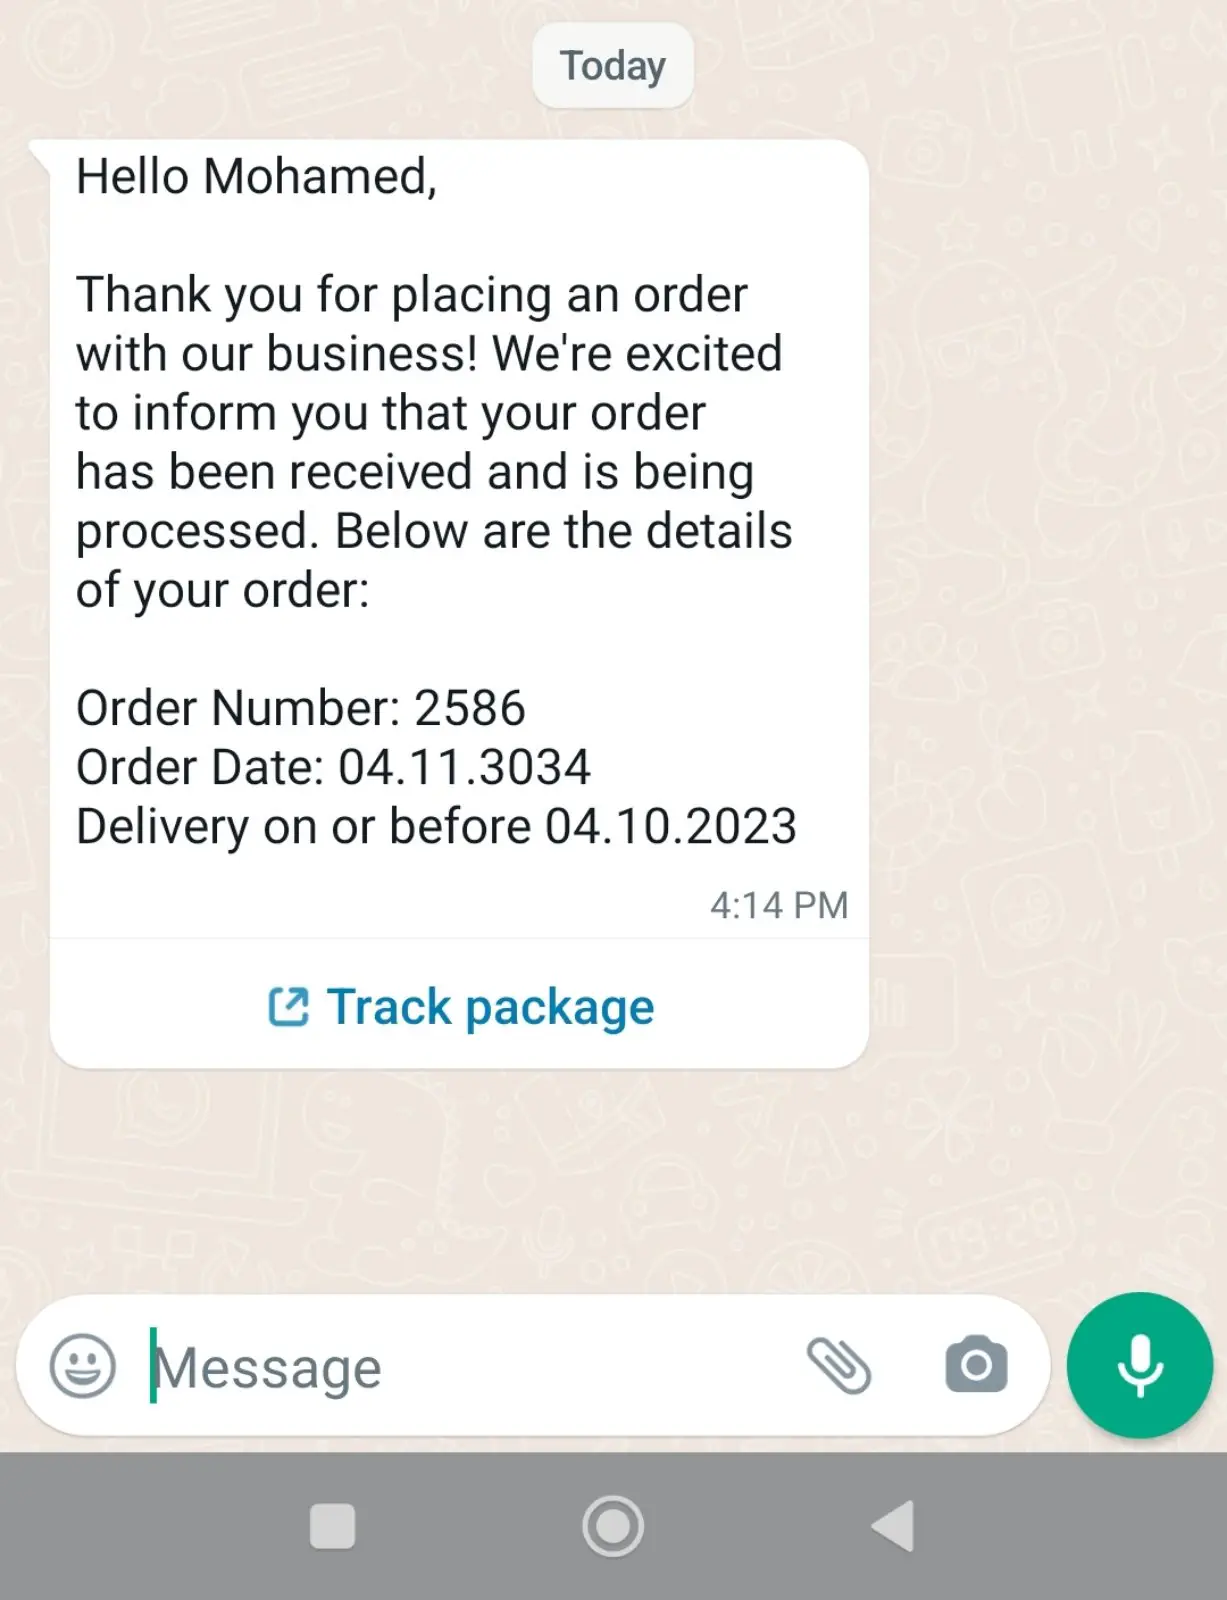 Streamlining Order Tracking and Notifications: WhatsApp Ecommerce